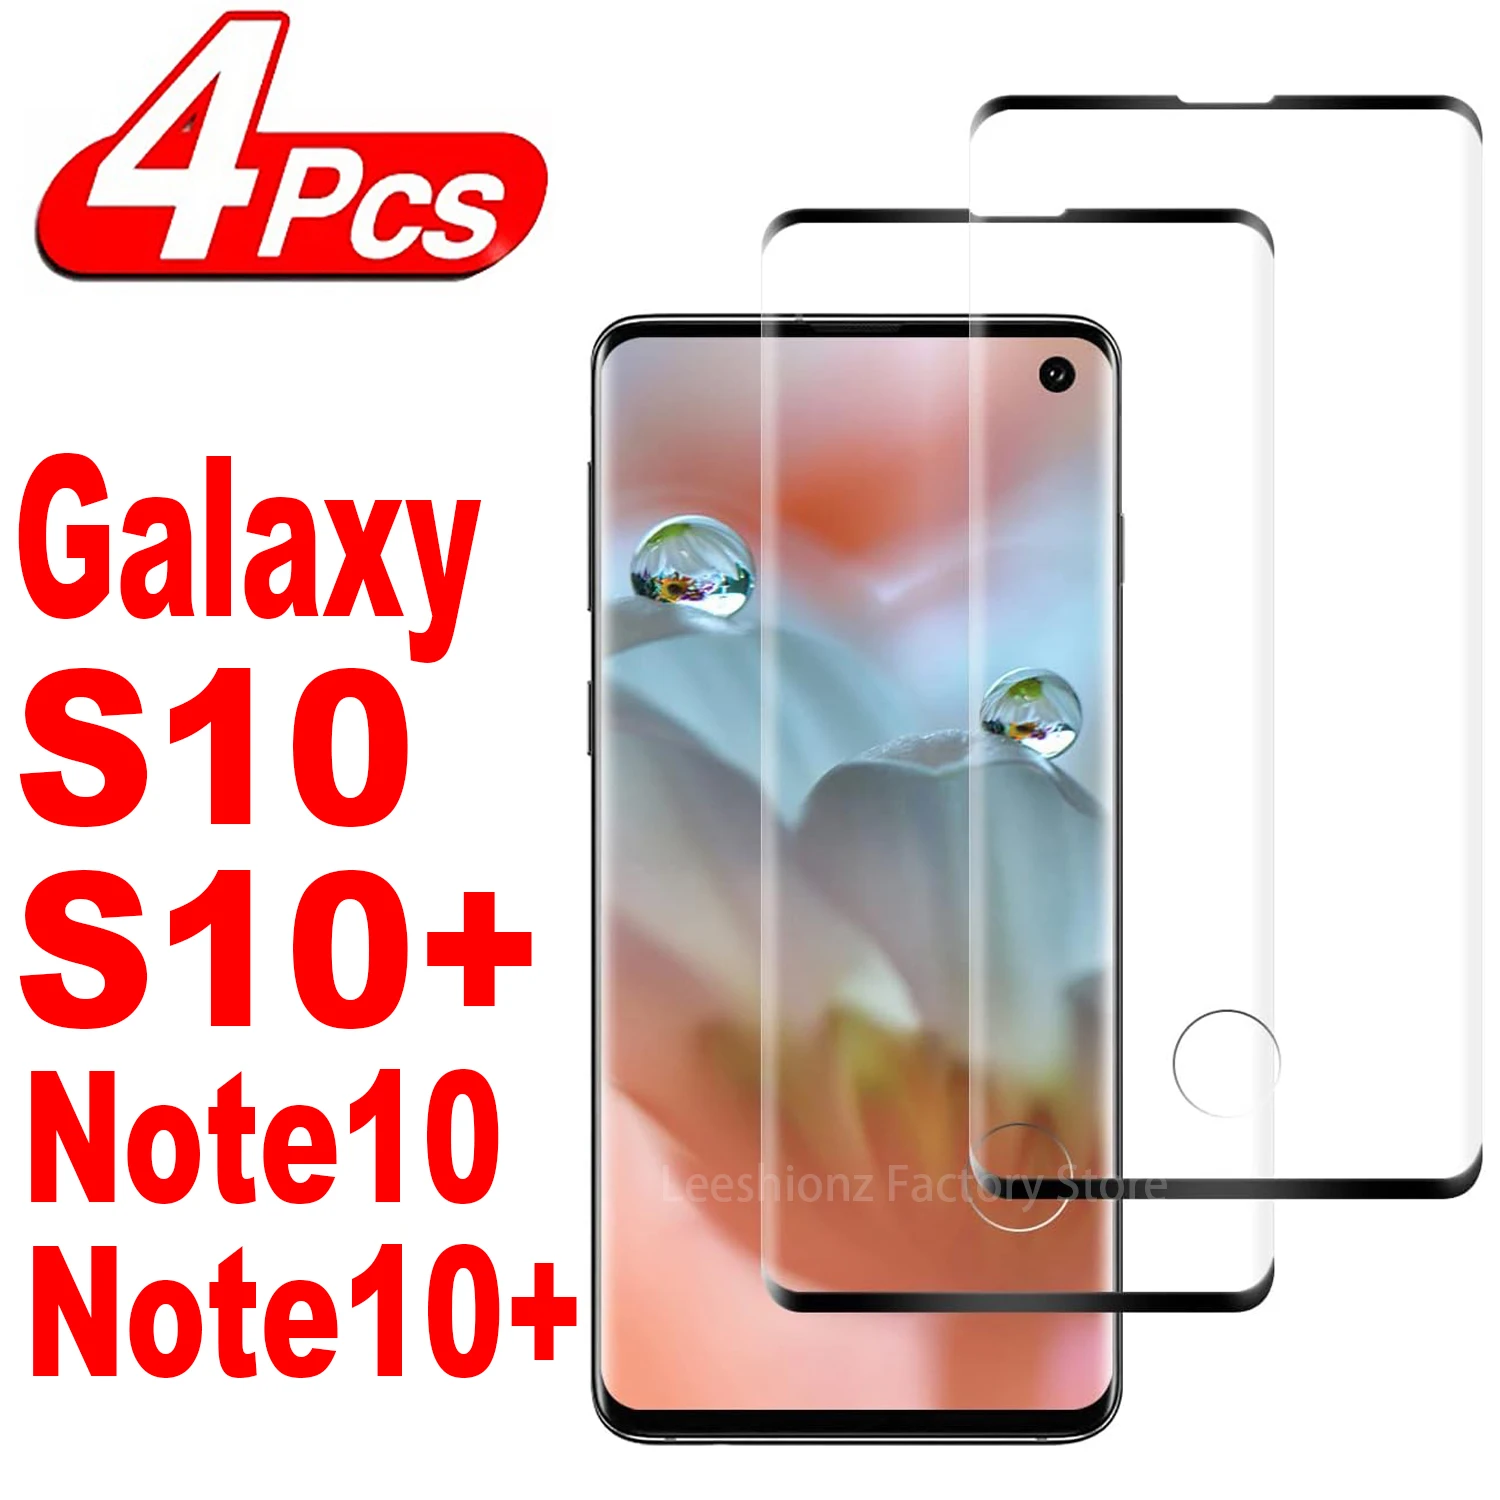 1/4Pcs 3D Screen Protector Glass For Samsung Galaxy S10 S10+ Note 10 Plus Note10+ Tempered Glass Film not full cover tempered glass 3d case friendly curved for samsung galaxy s10 plus s10 s10e note 9 8 s9 s8 plus screen protector